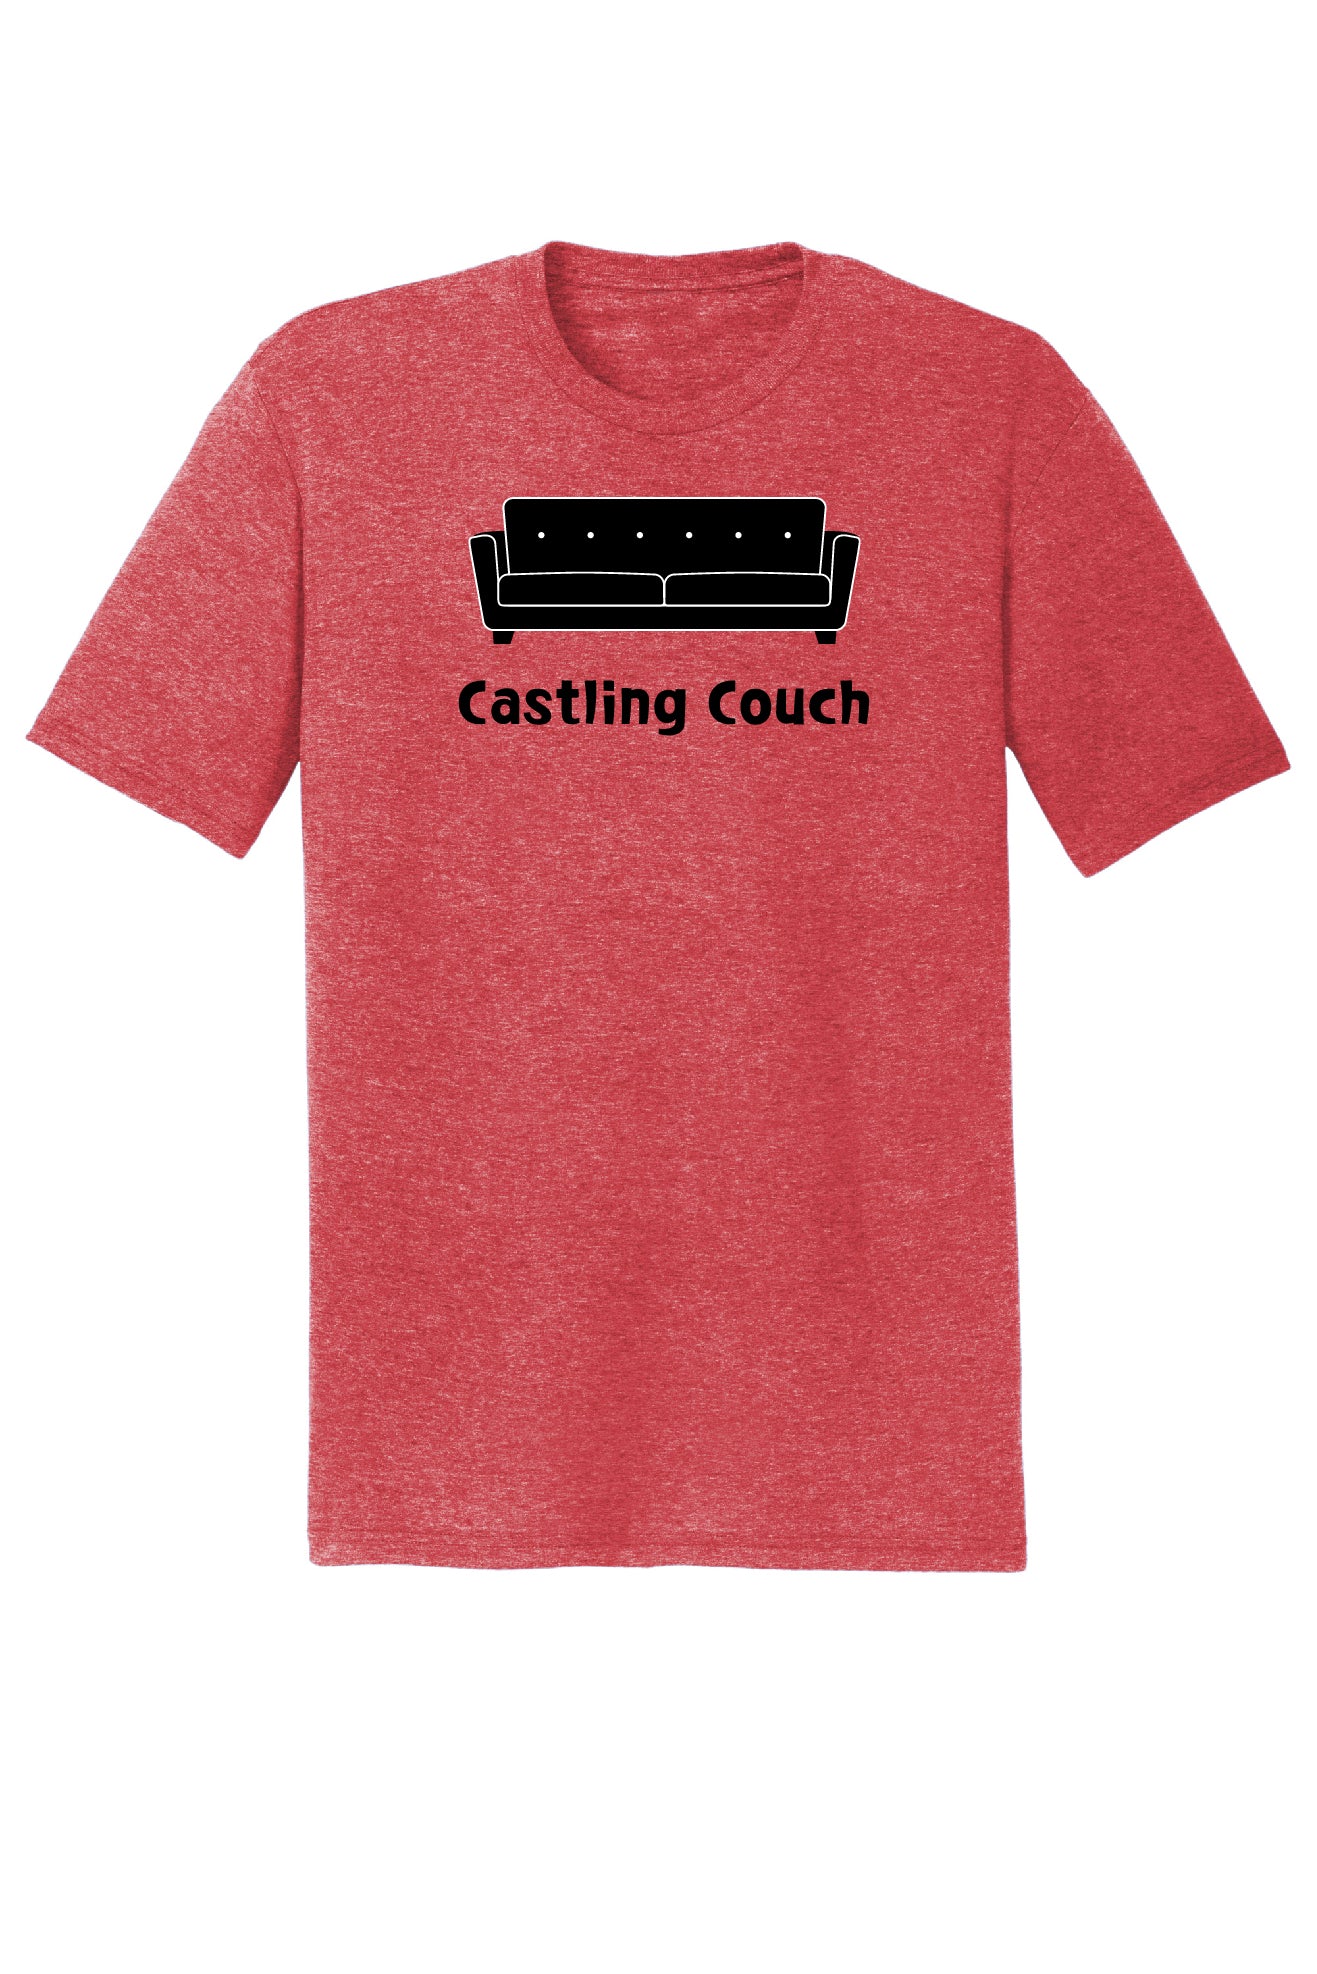 Castling Couch Tee